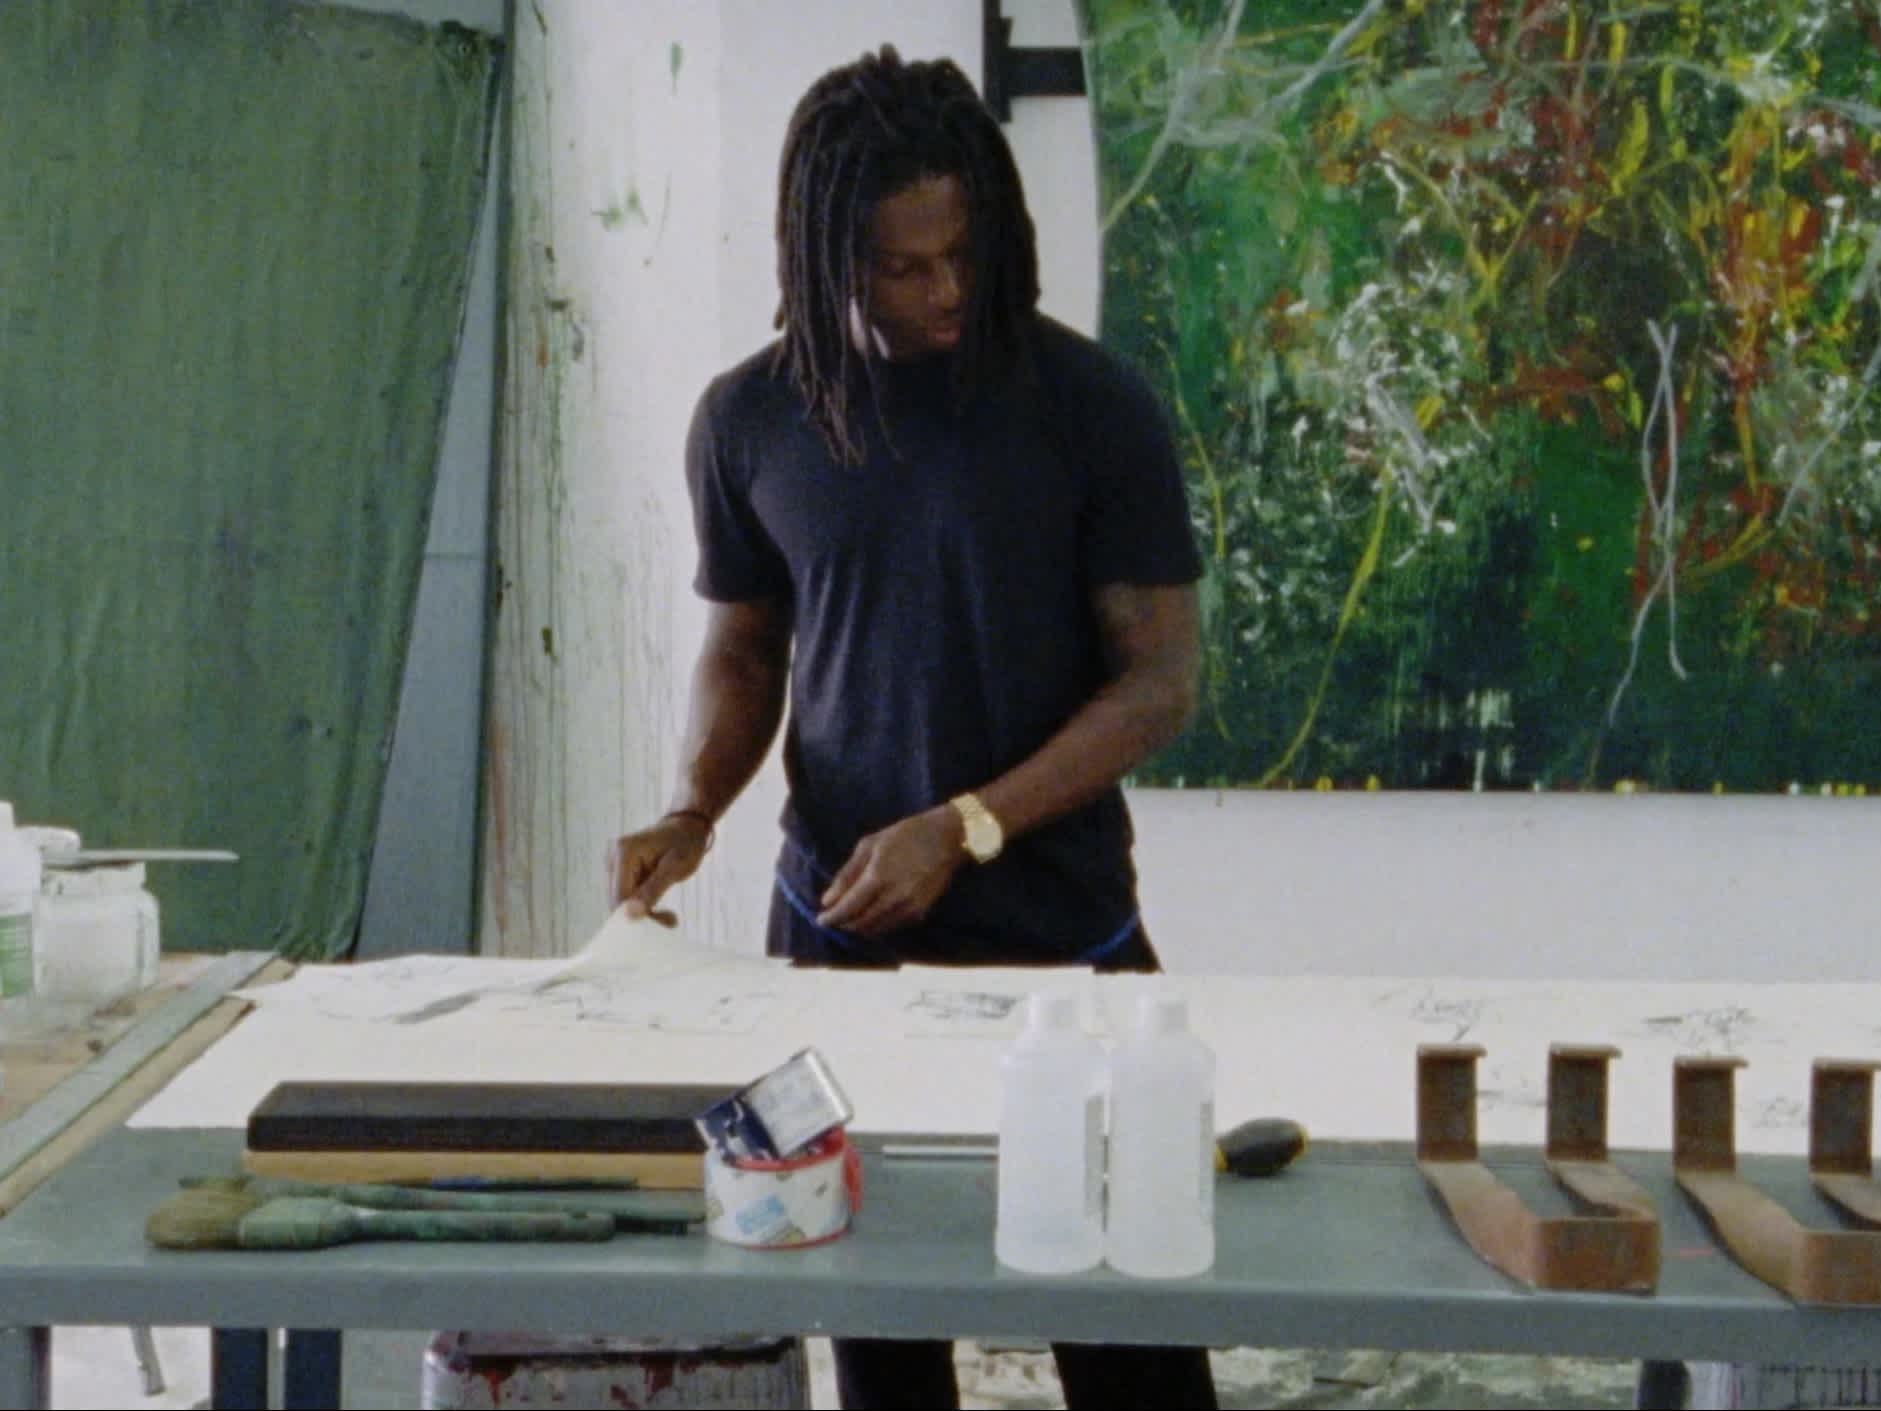 An artist stands at a table making work. Large abstract paintings are behind him on the wall.